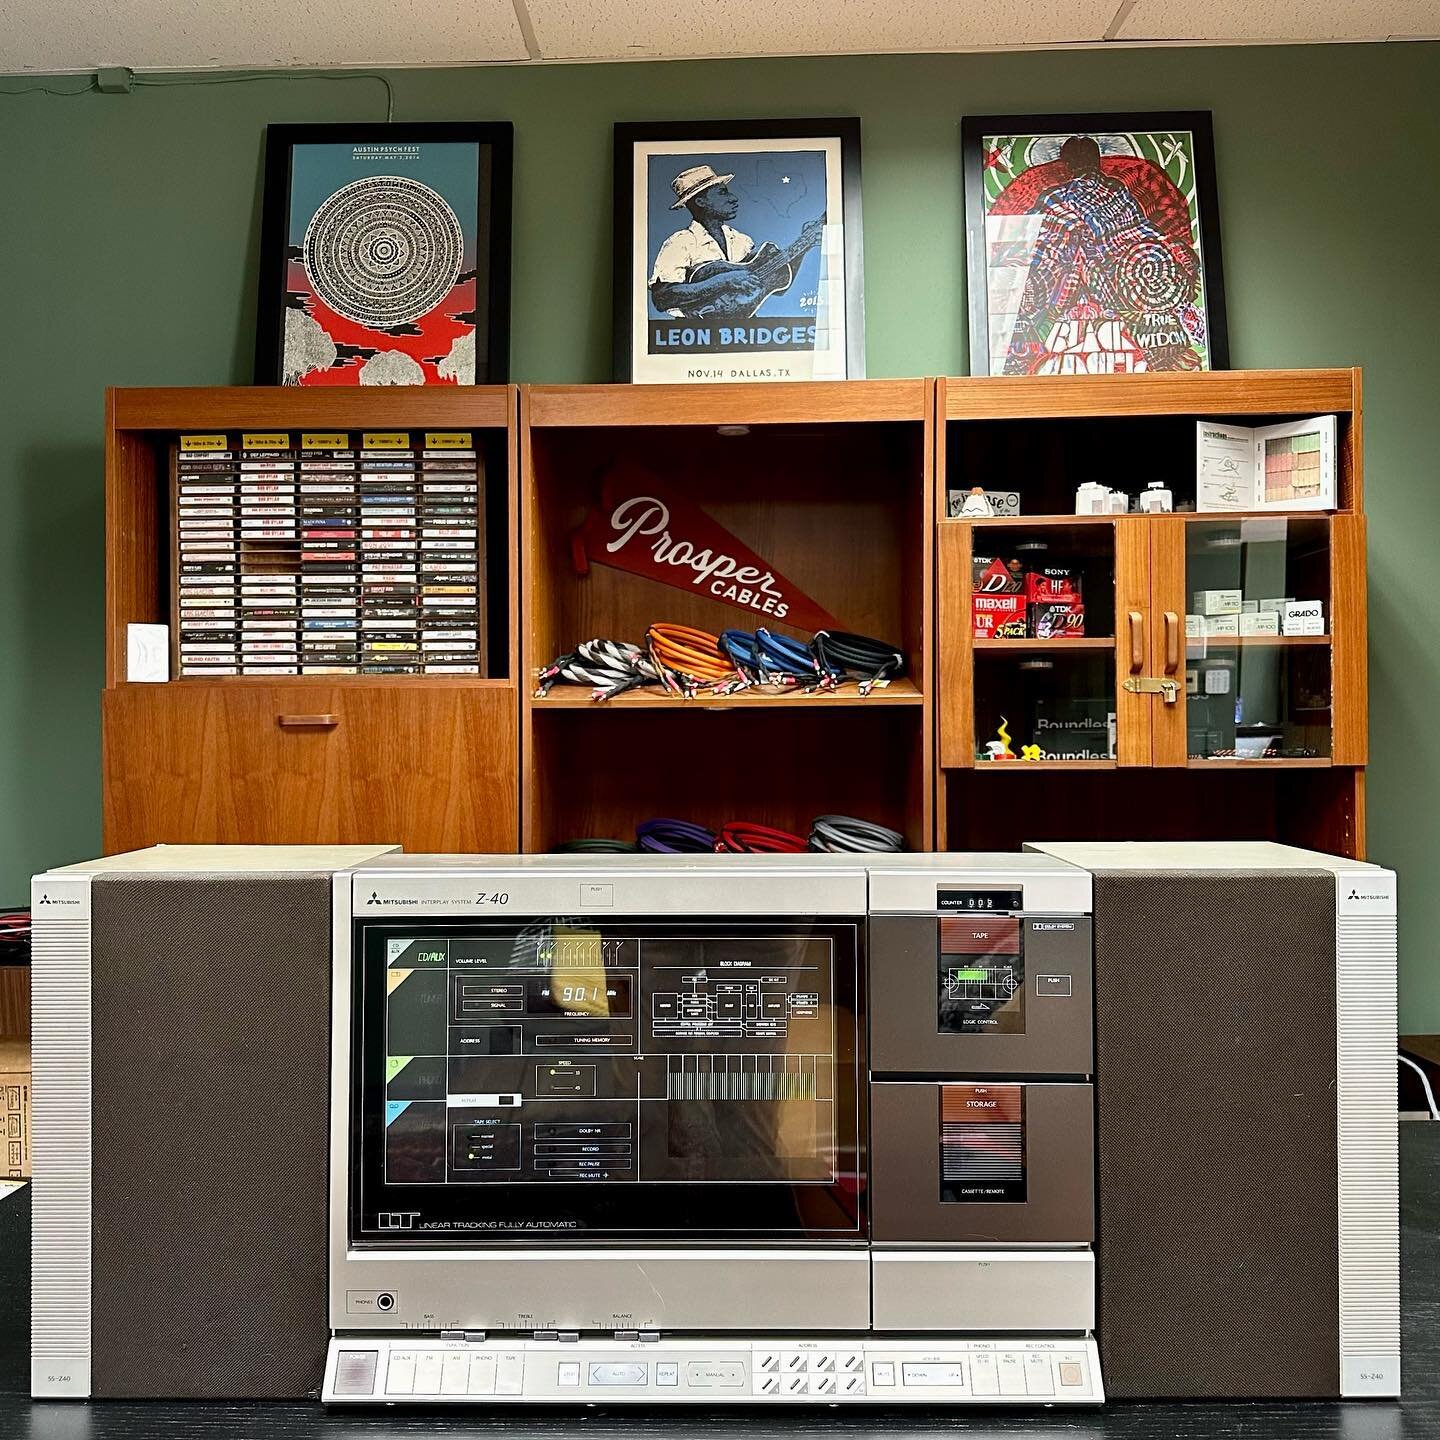 [AVAILABLE] Today we offer one of the most rare &lsquo;80s pieces we&rsquo;ve ever had here at the shop. This Mitsubishi Z-40 system features a vertical turntable, cassette deck, receiver, and includes matching speakers (although it&rsquo;s not requi